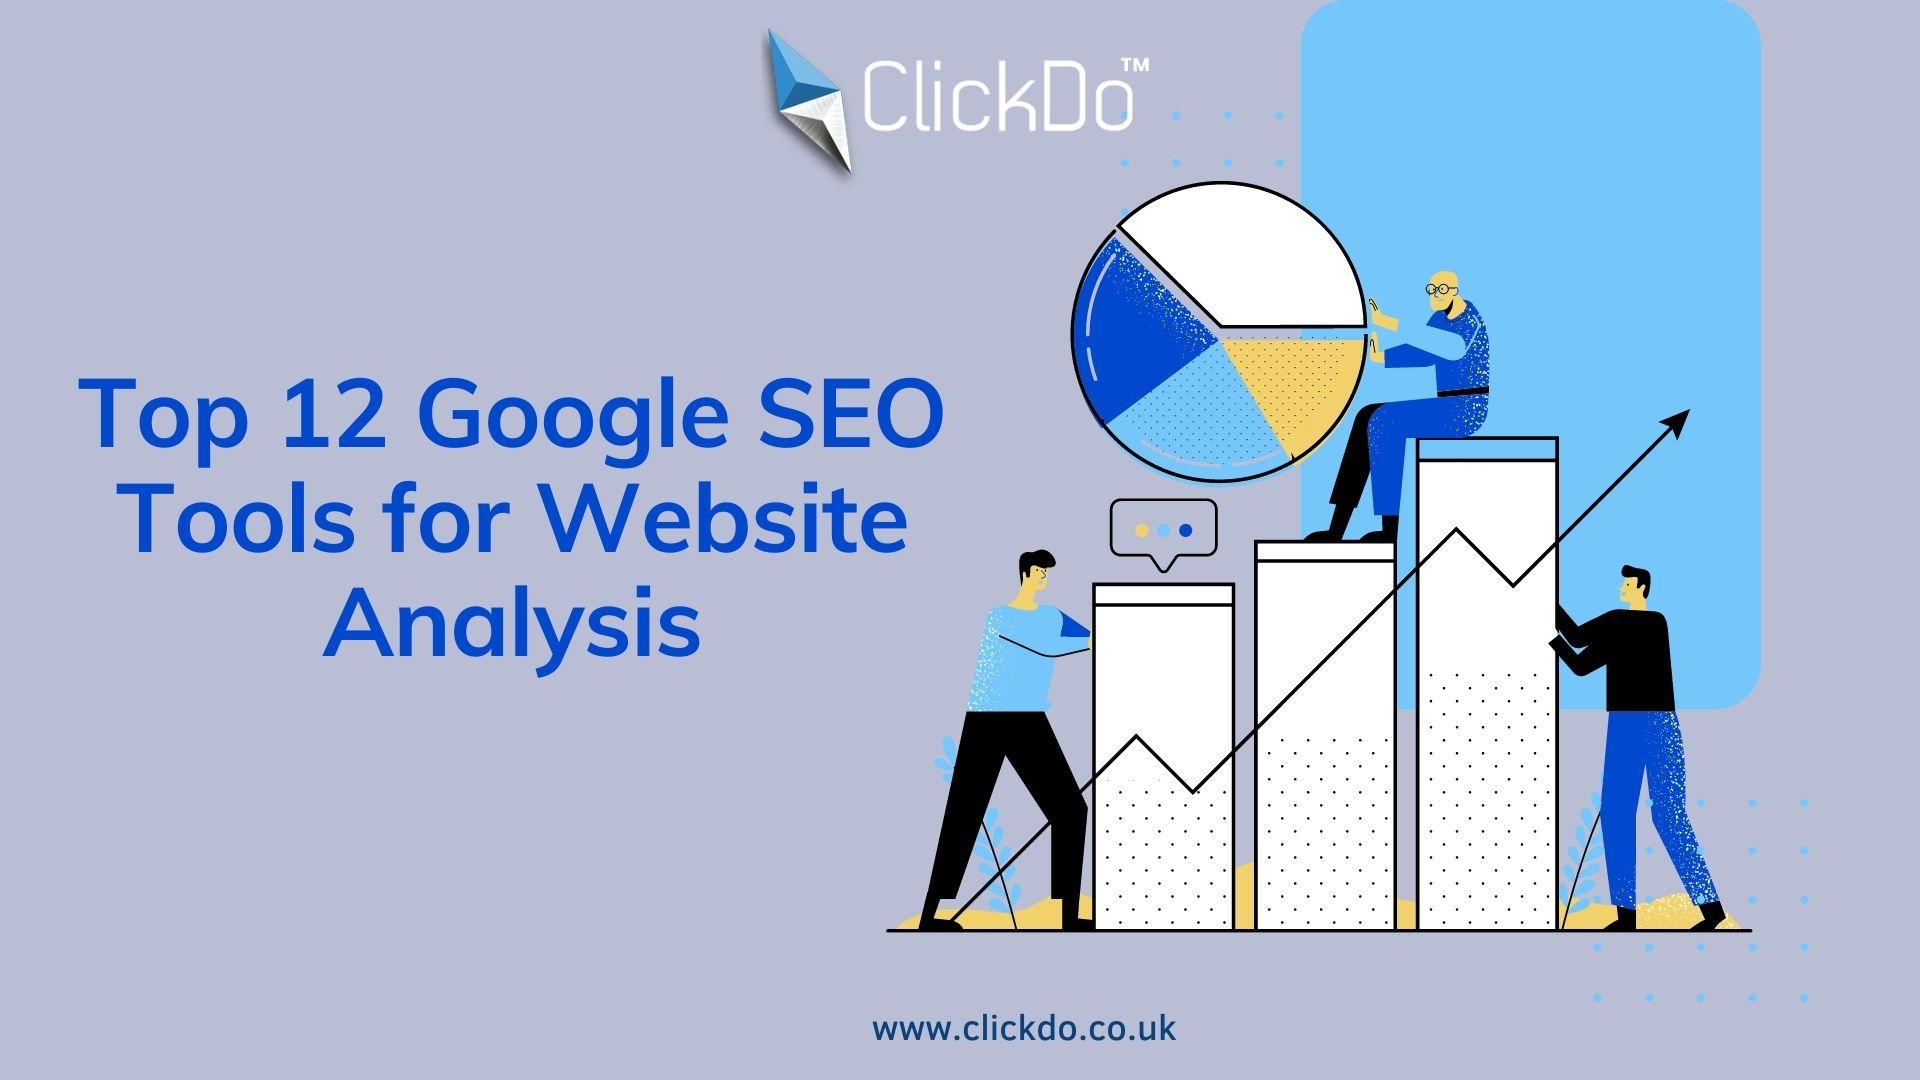 Top 12 Google SEO Tools for Website Analysis